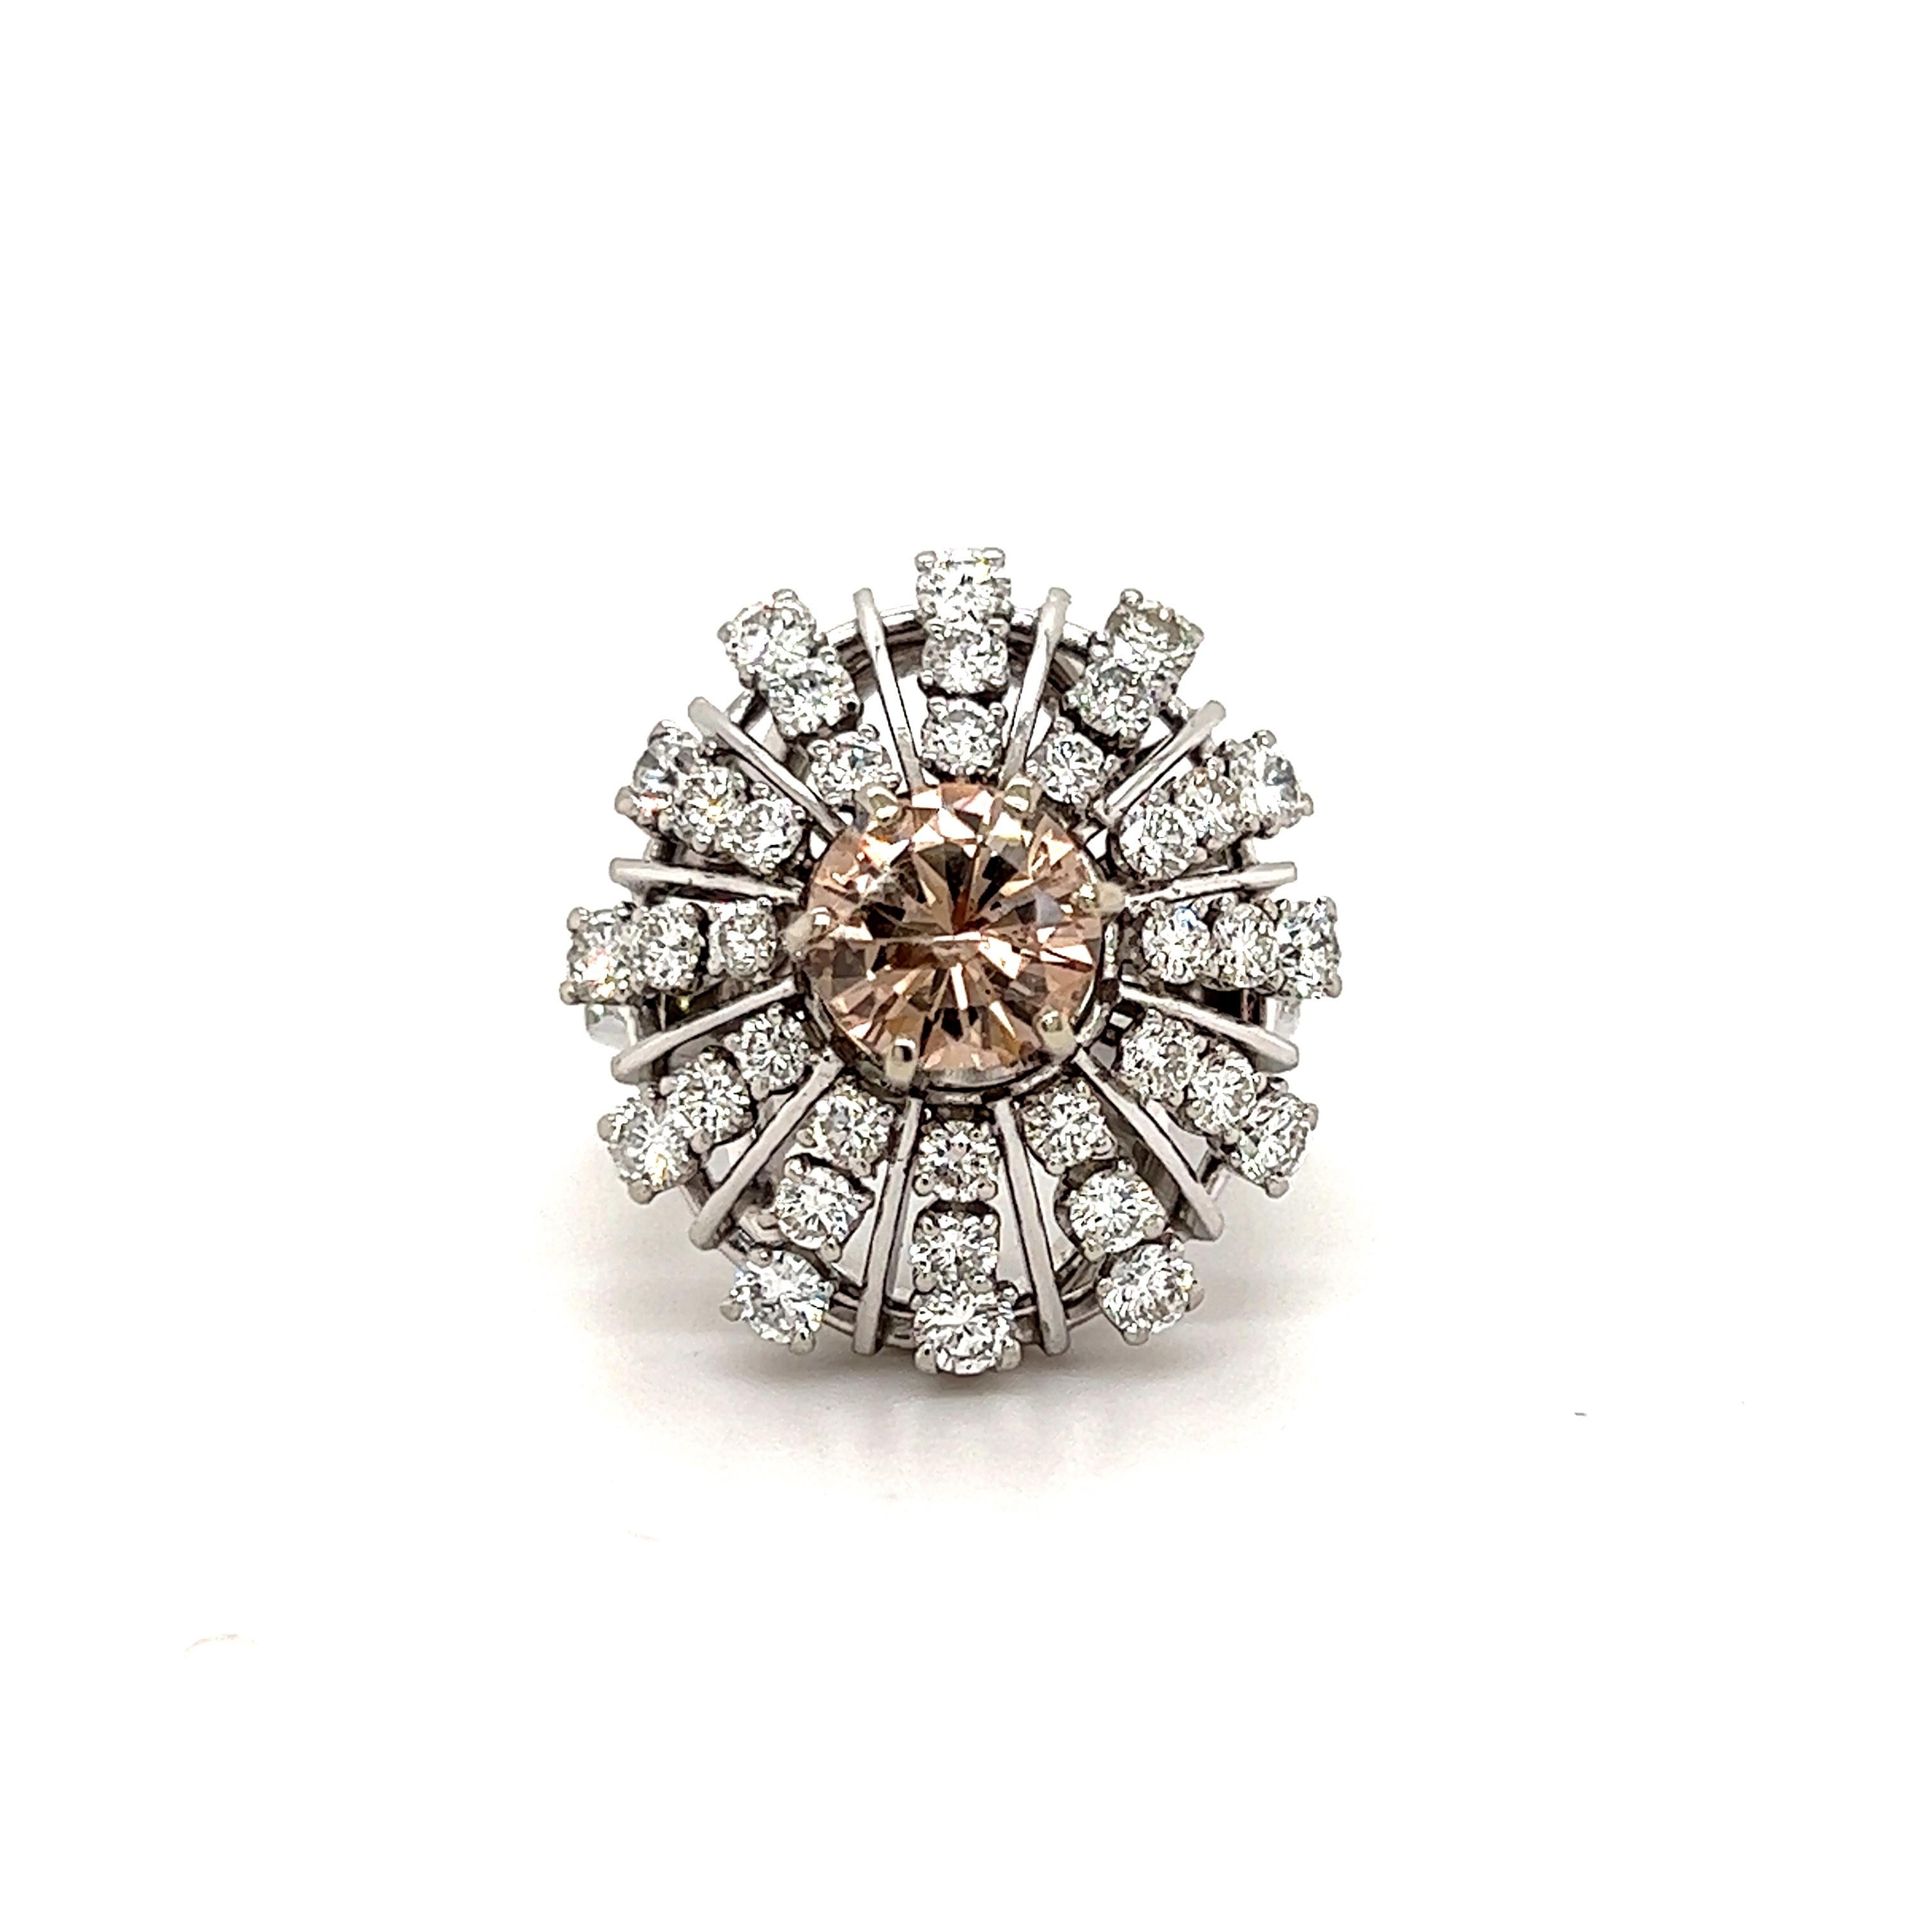 18K White Gold Cognac and White Diamond Cocktail Ring

This unique basket style ring features a round cut, apprx. 1.25ct. Champagne Diamond center surrounded by 12 rows of diamonds.

Apprx. 3.00ct. G color VS-SI Clarity diamonds total weight. 

Ring